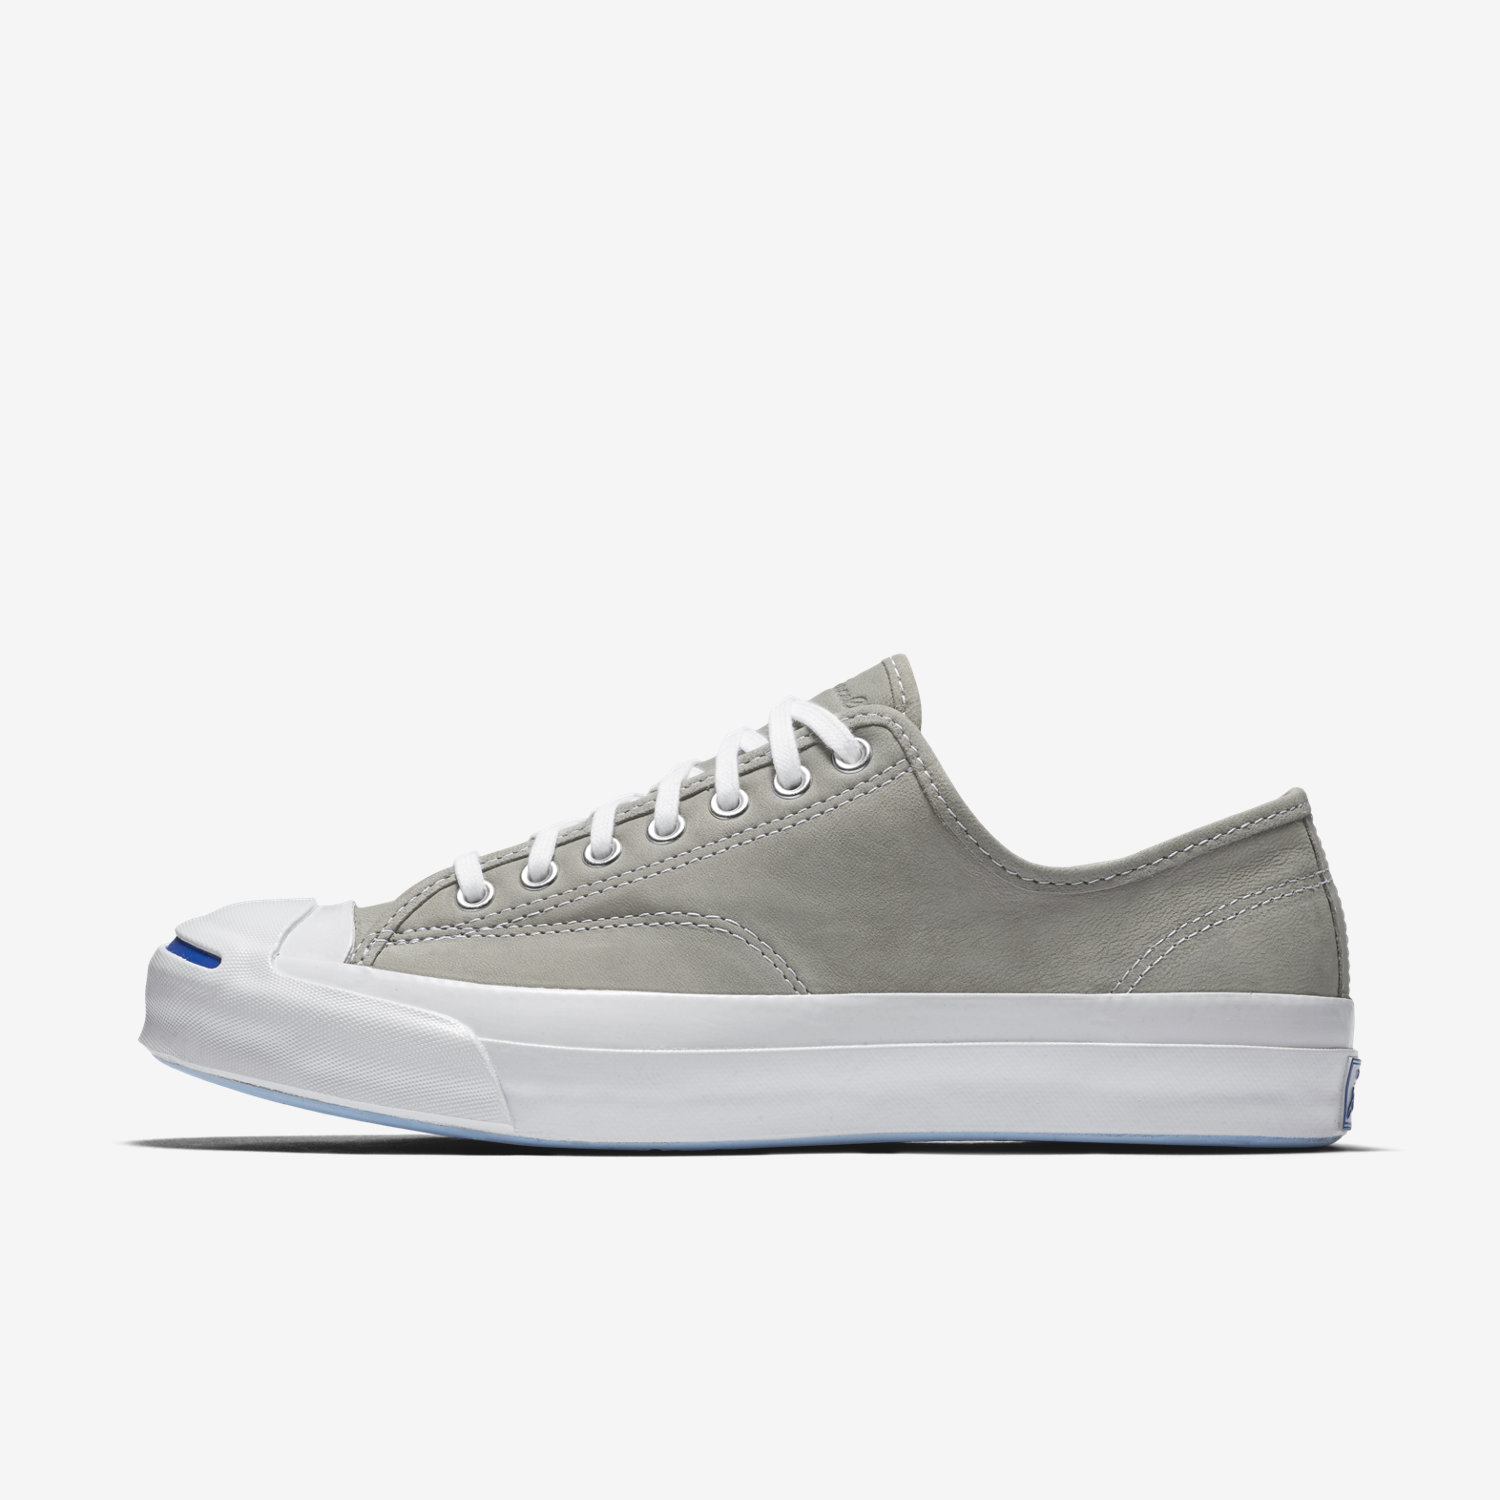 converse jack purcell signature nubuck low top